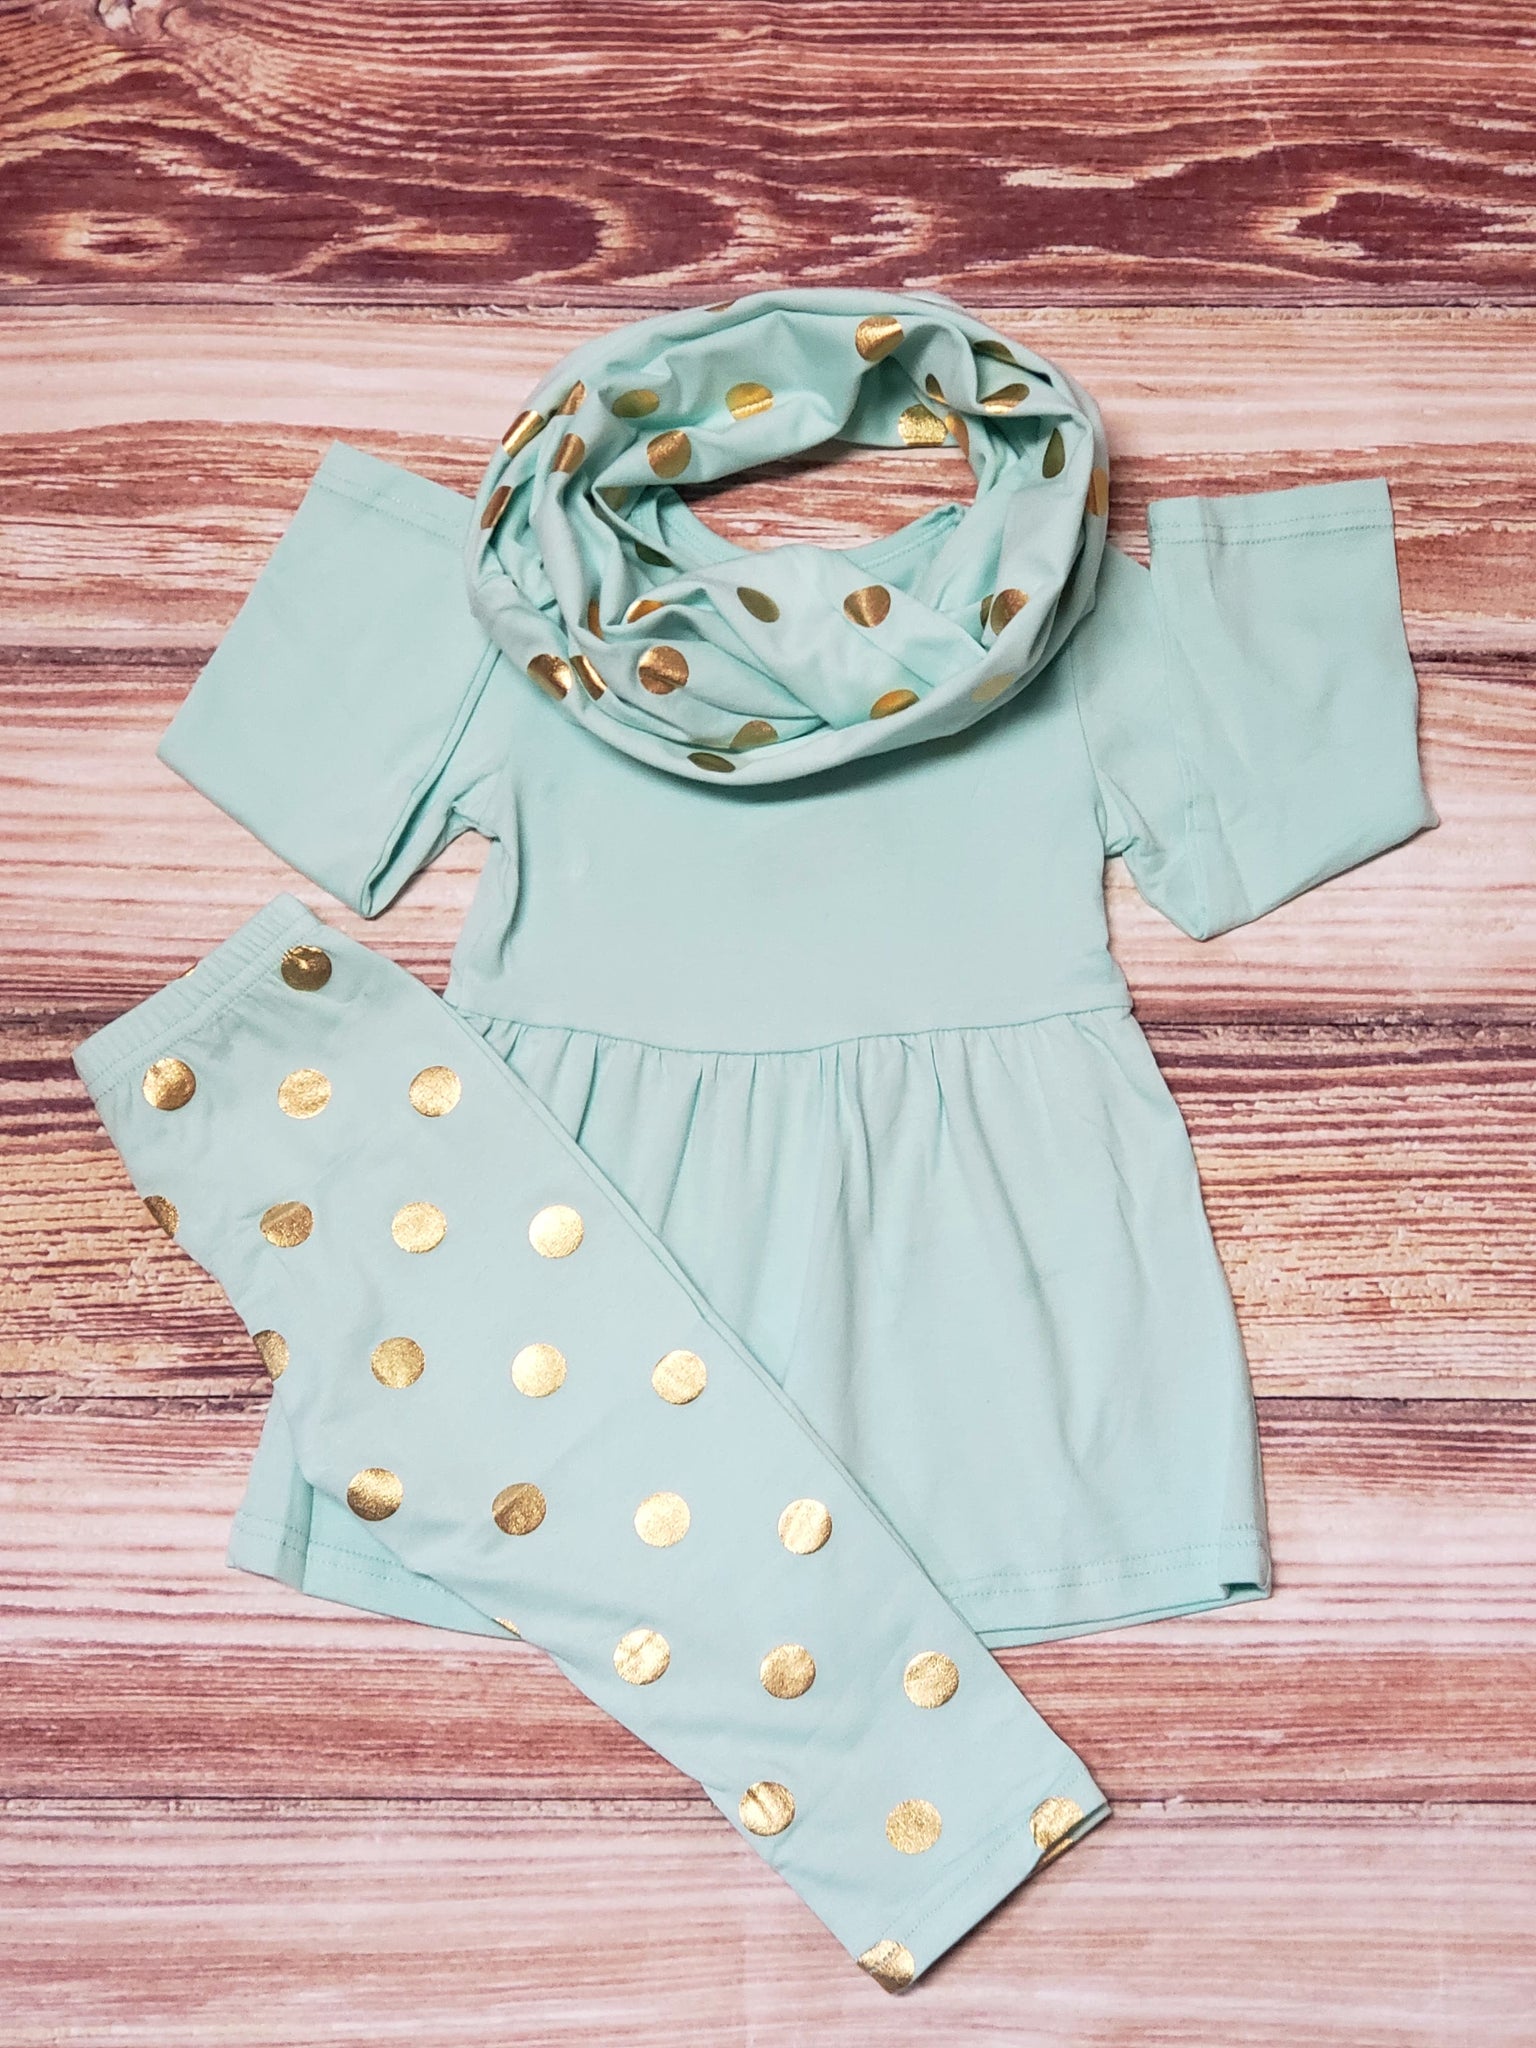 Mint and Gold Scarf set - Momma G's Children's Boutique, Screen Printing, Embroidery & More